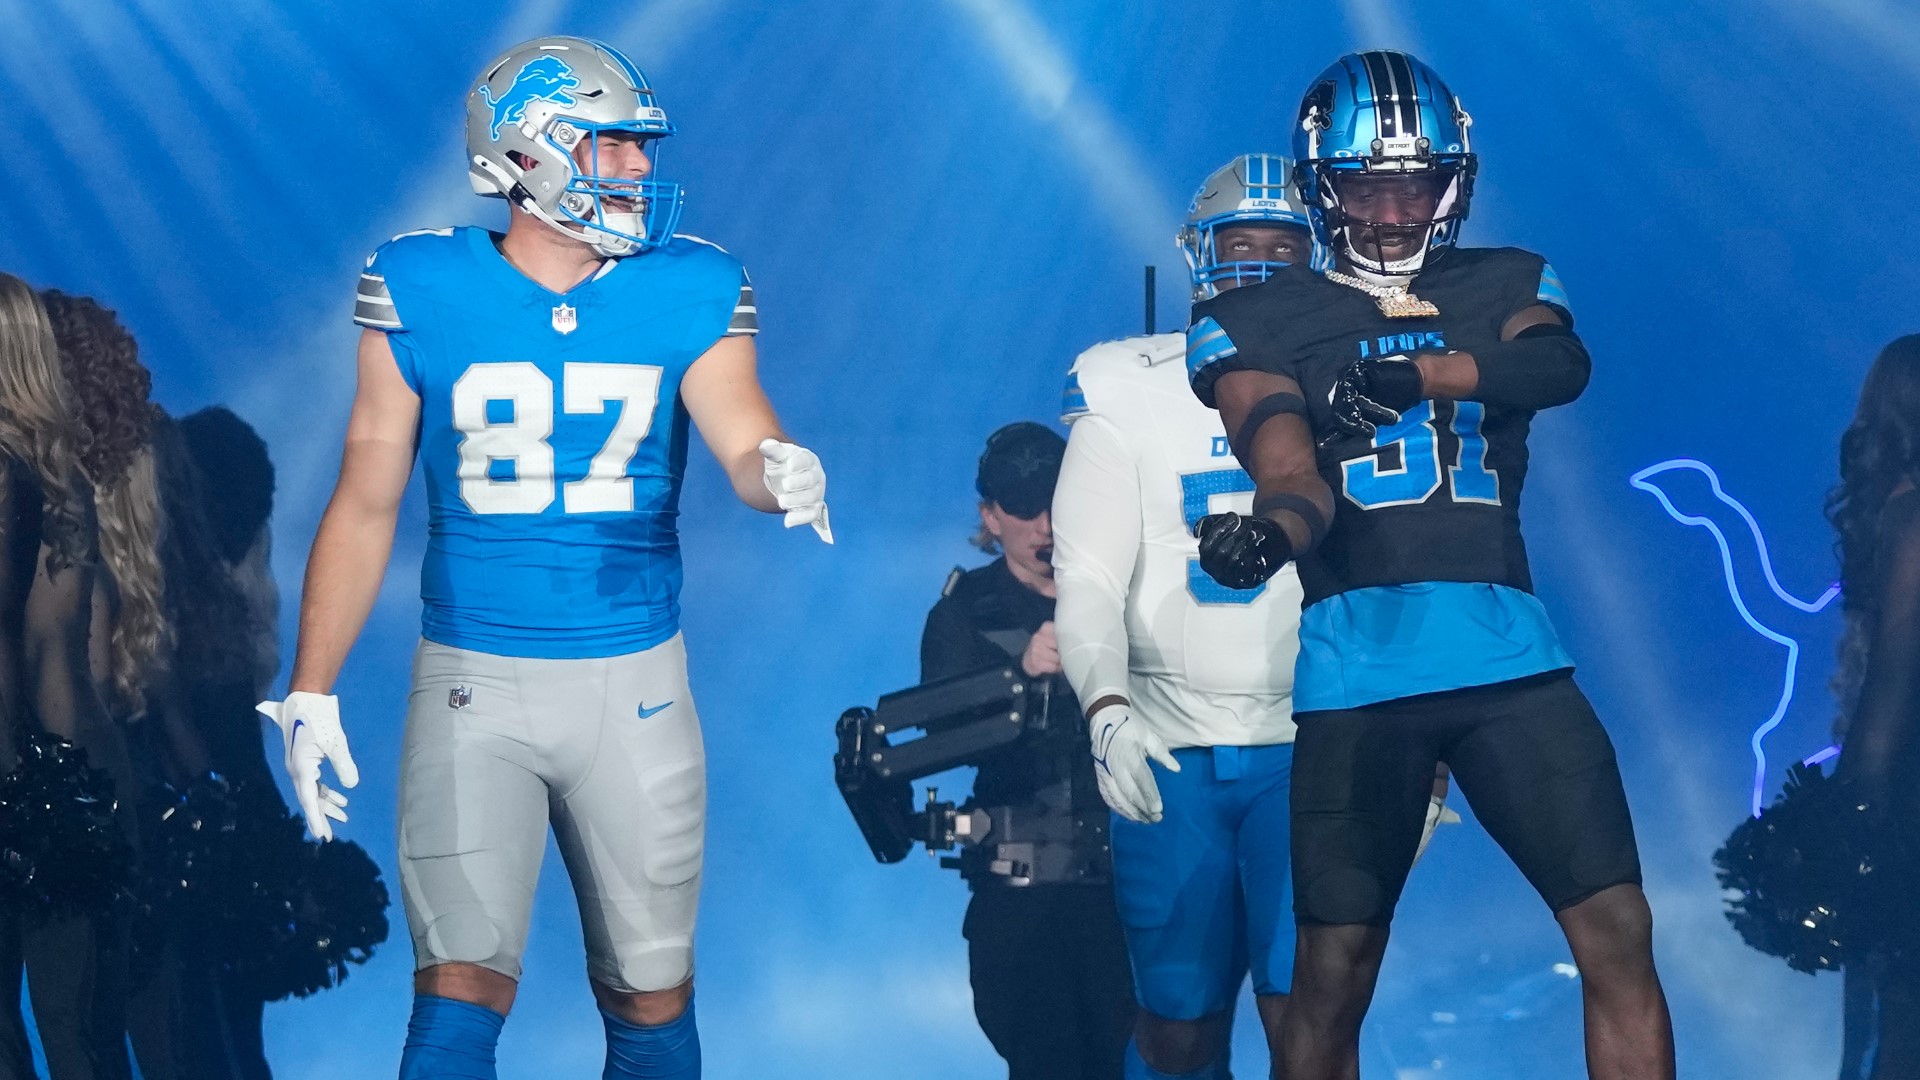 The Lions said they worked with Nike to "reestablish Honolulu Blue" by giving it a richer tone that is a throwback to earlier uniforms.